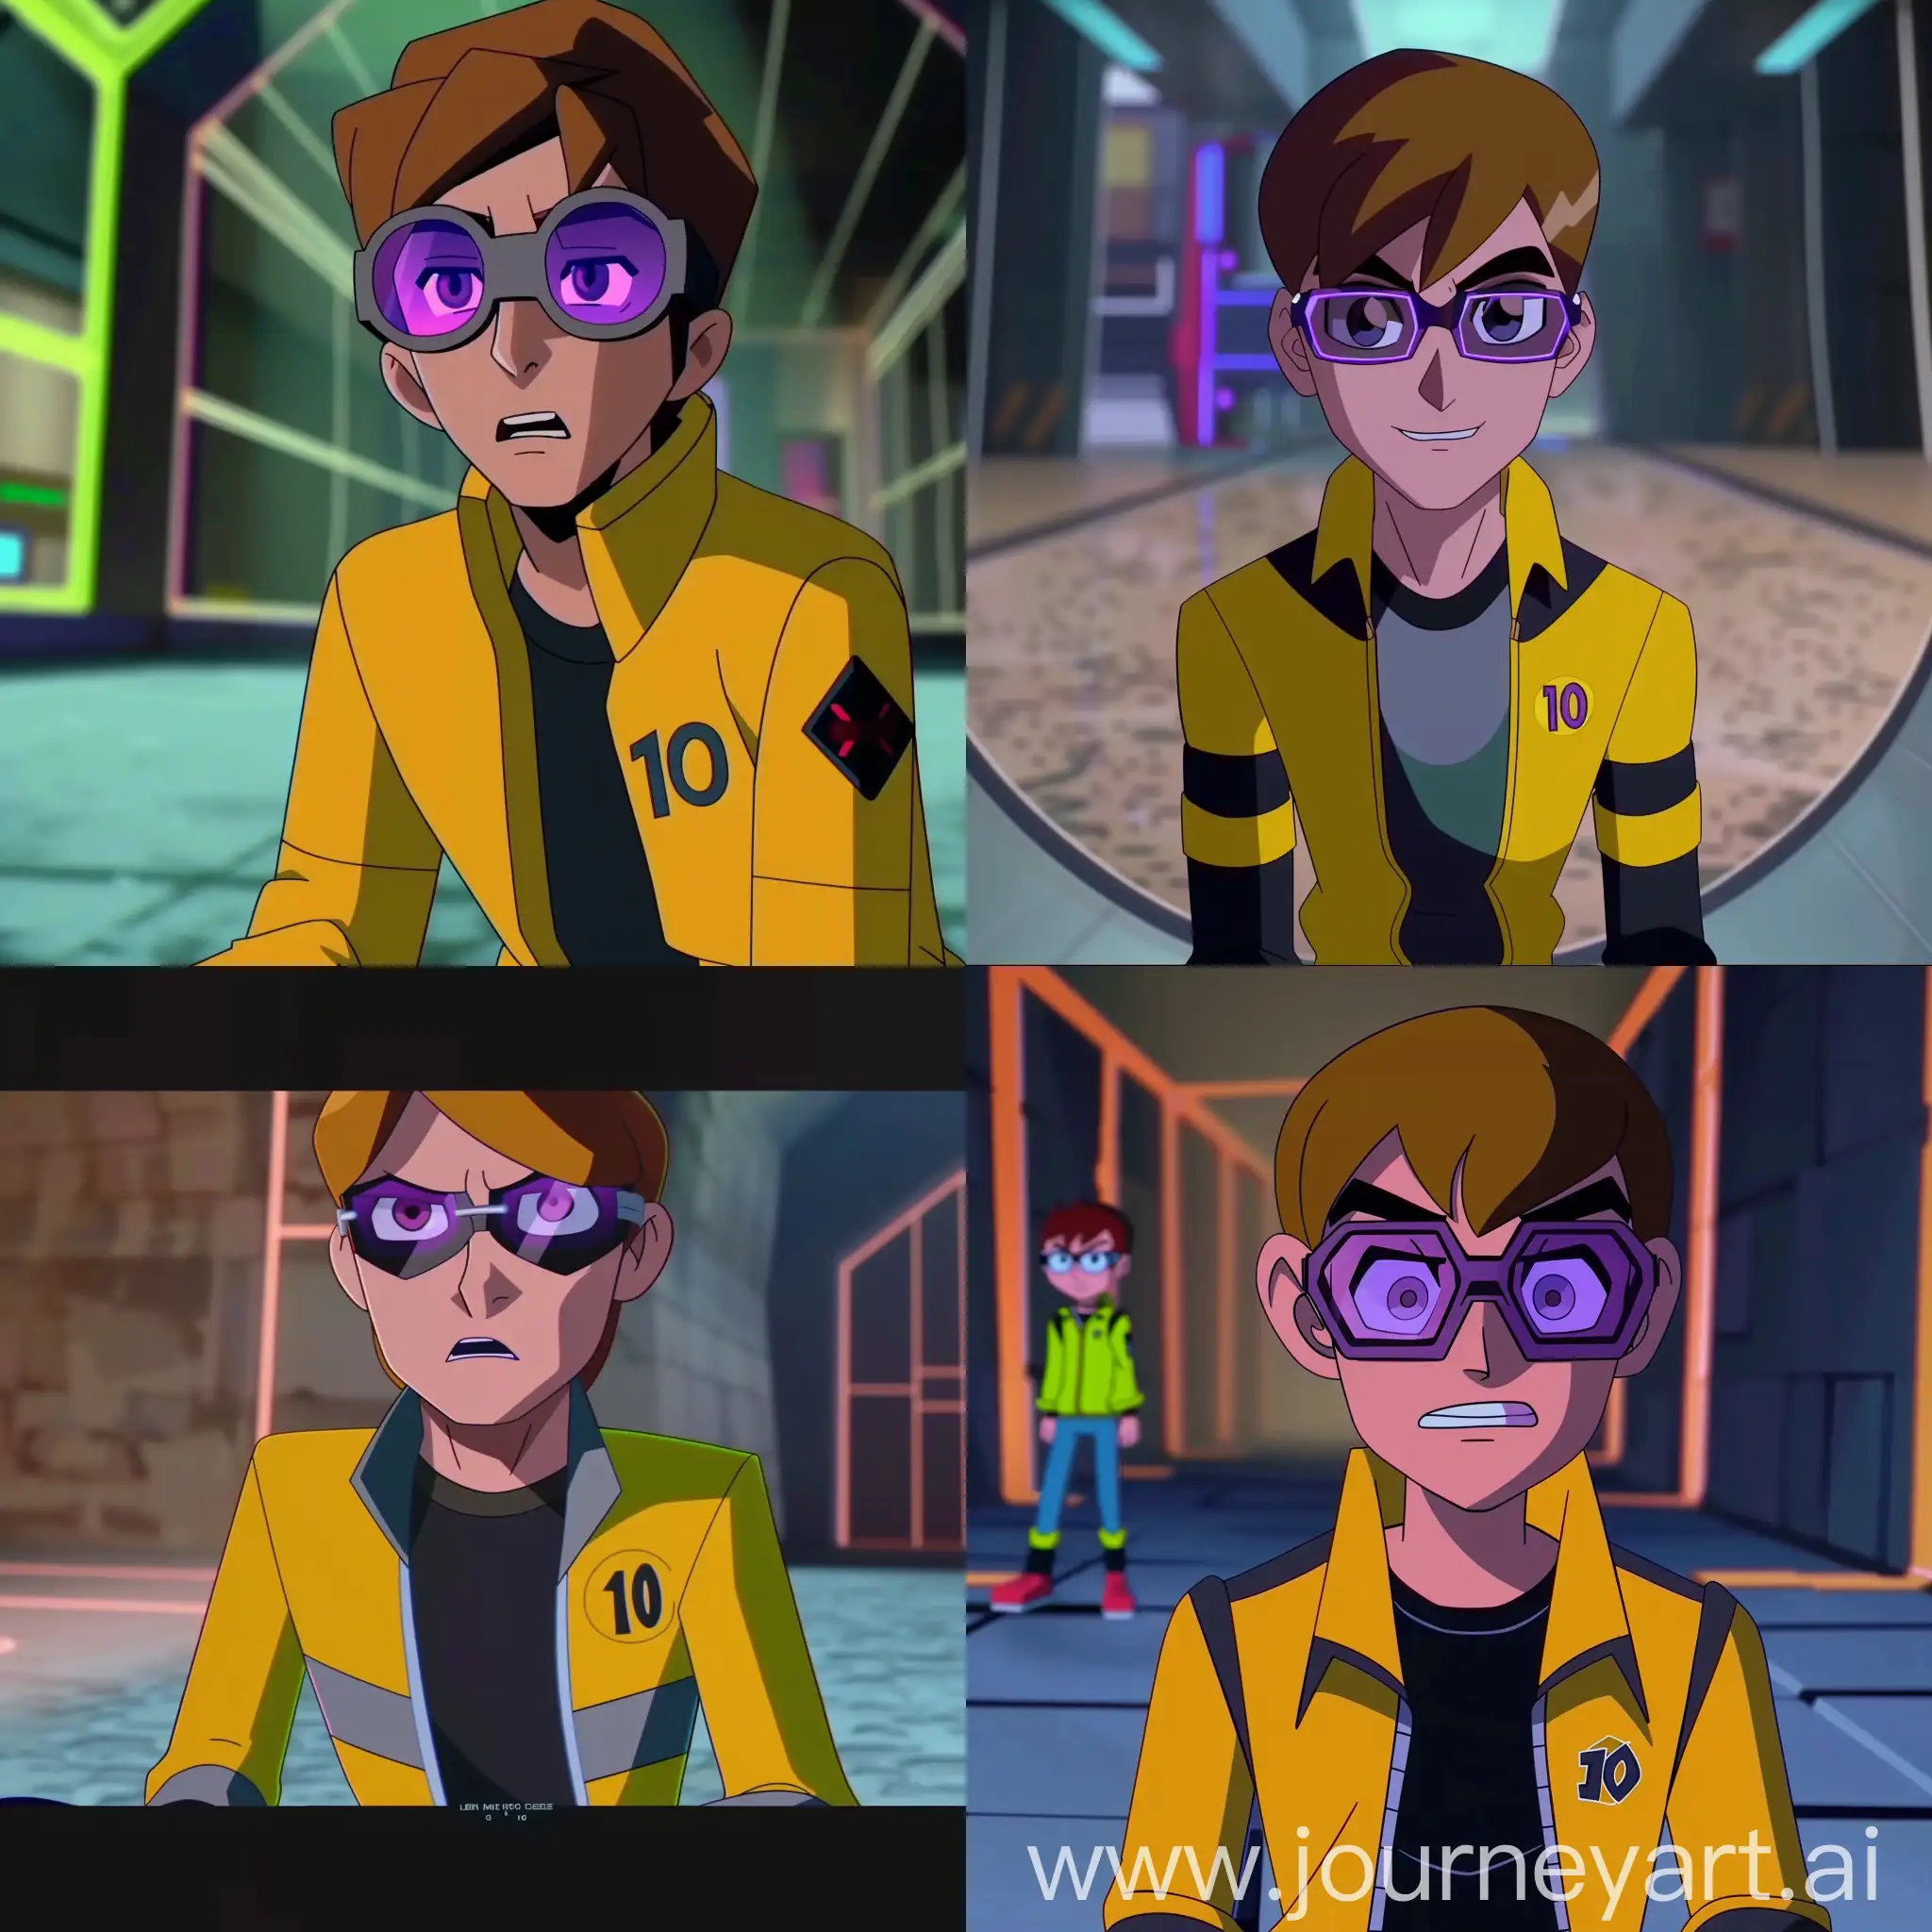 he's an animated character in the style of Man of Action[ben 10], he's handsome and has curved jawline, he is 5'11 in height and 60kg in weight. he wearing glasses with one lens of color purple and other lens of color grey, still is captured from front straight angle and it's a close shot with him smirking a little and "ben 10" is embroidered on his yellow jacket and black sweatshirt underneath, still from the film. he's sitting on the empty hollow space with dim blur aesthetic background --v 6  --sref https://cdn.discordapp.com/attachments/1215979386310889605/1216982884083040266/Picsart_24-03-08_22-57-05-471.jpg?ex=66025ea2&is=65efe9a2&hm=a3c3cd11df6f7a445bf1bb038220edc722e23bafed0277ddb6c2189fdd7132ea&